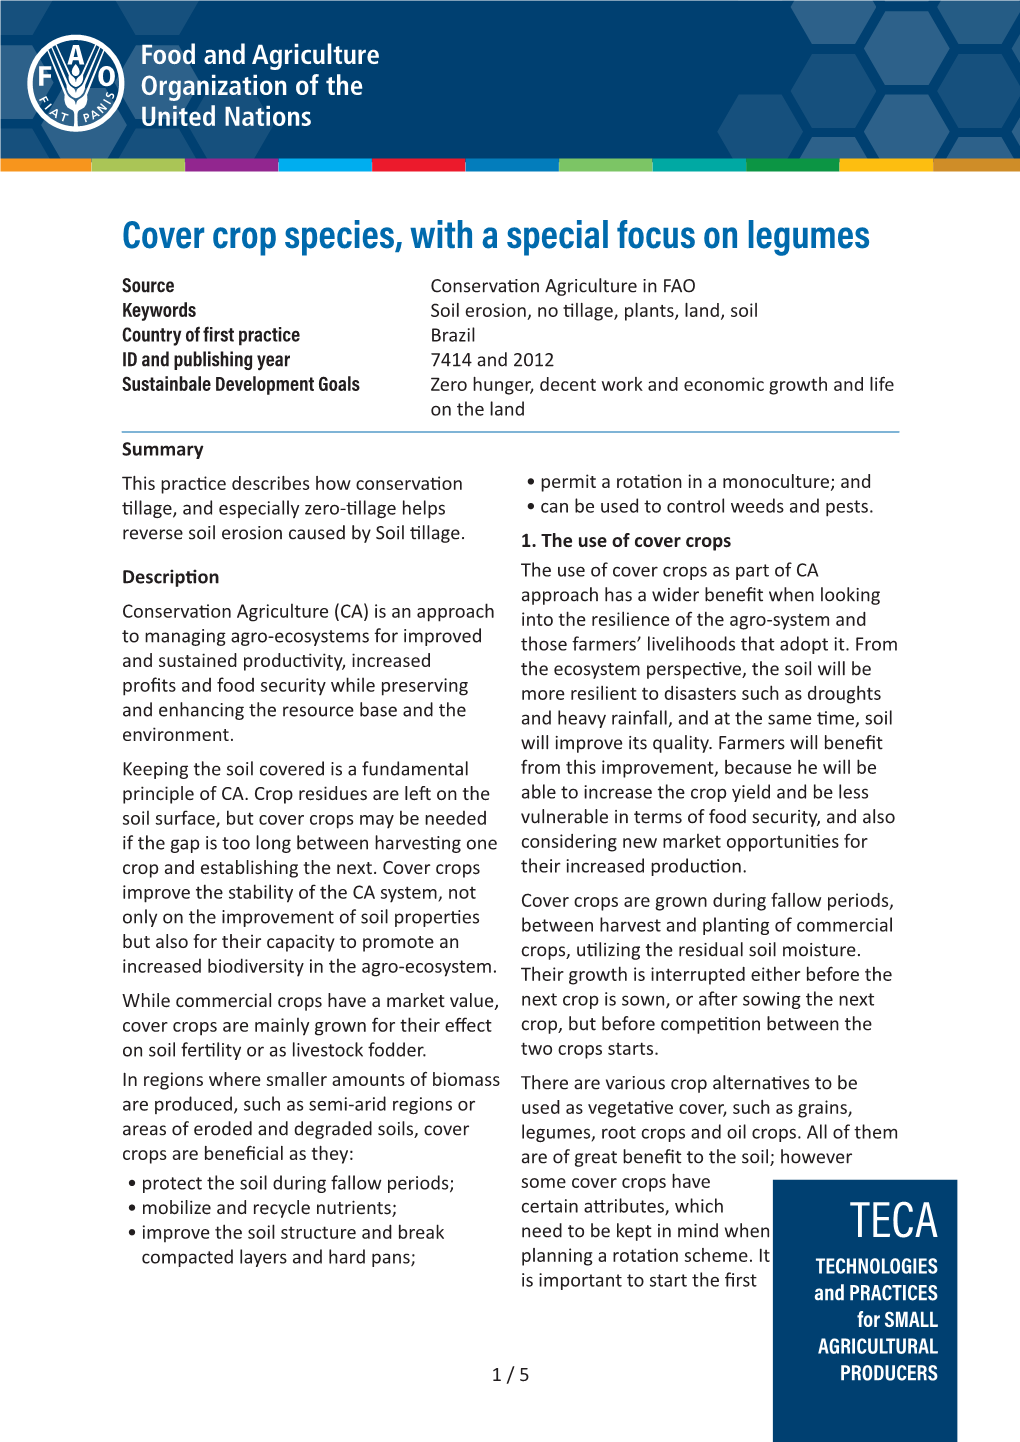 Cover Crop Species, with a Special Focus on Legumes